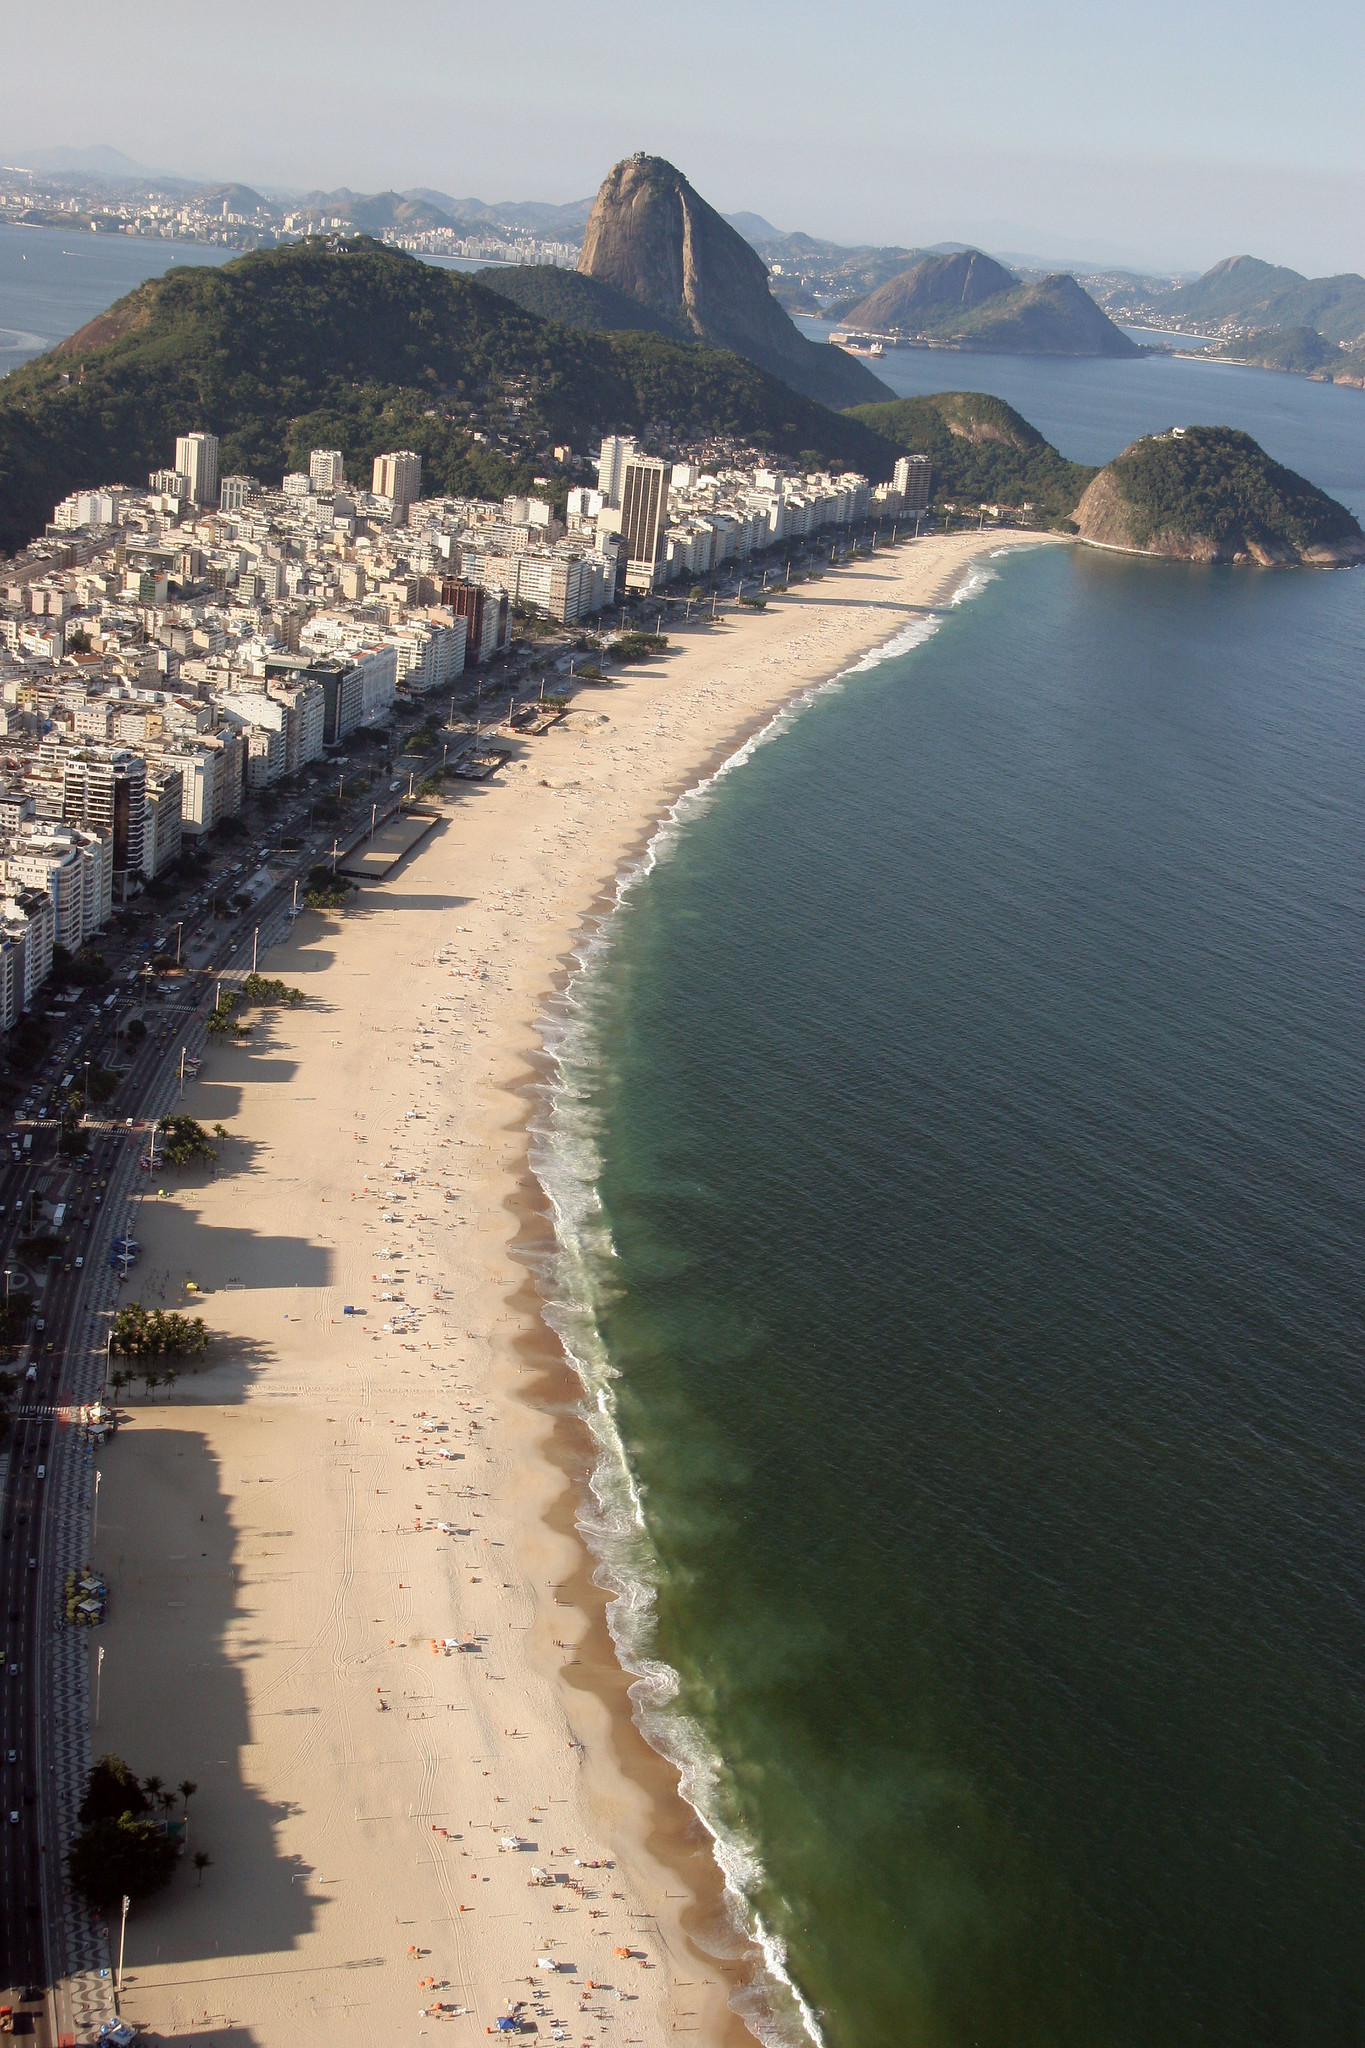 An aerial view of Copacabana beach. A curved stretch of sand reaches towards a large rocky hill. Tightly packed building hug the sand on the left, while the sea laps the beach on the right. Foamy waves appear where the sea meets the sand. Image: Ricardo Zerrener/Riotur